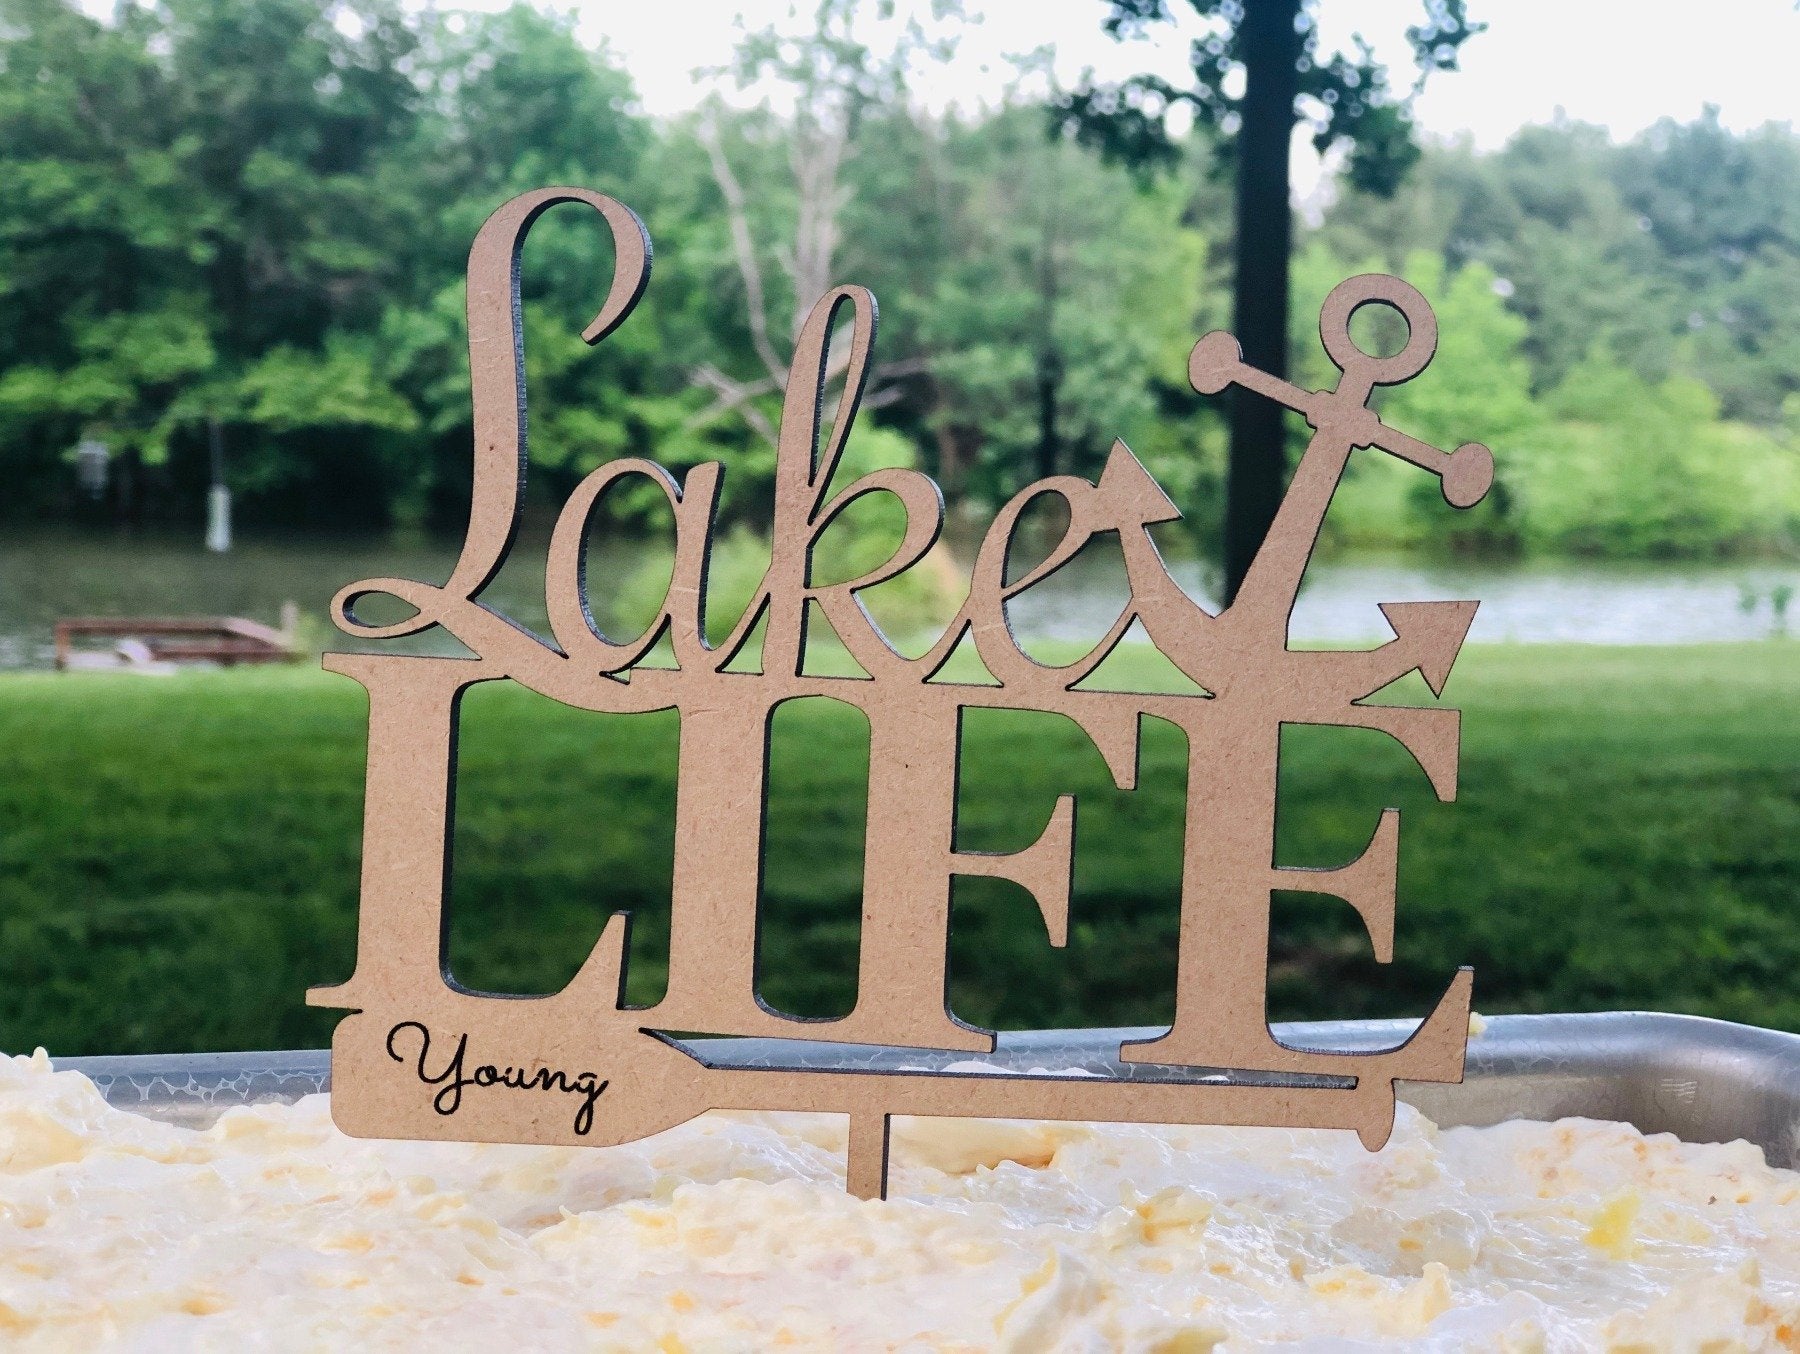 Personalized Lake Life Cake Topper - Made in Wood or Acrylic, Cake Toppers, designLEE Studio, designLEE Studio